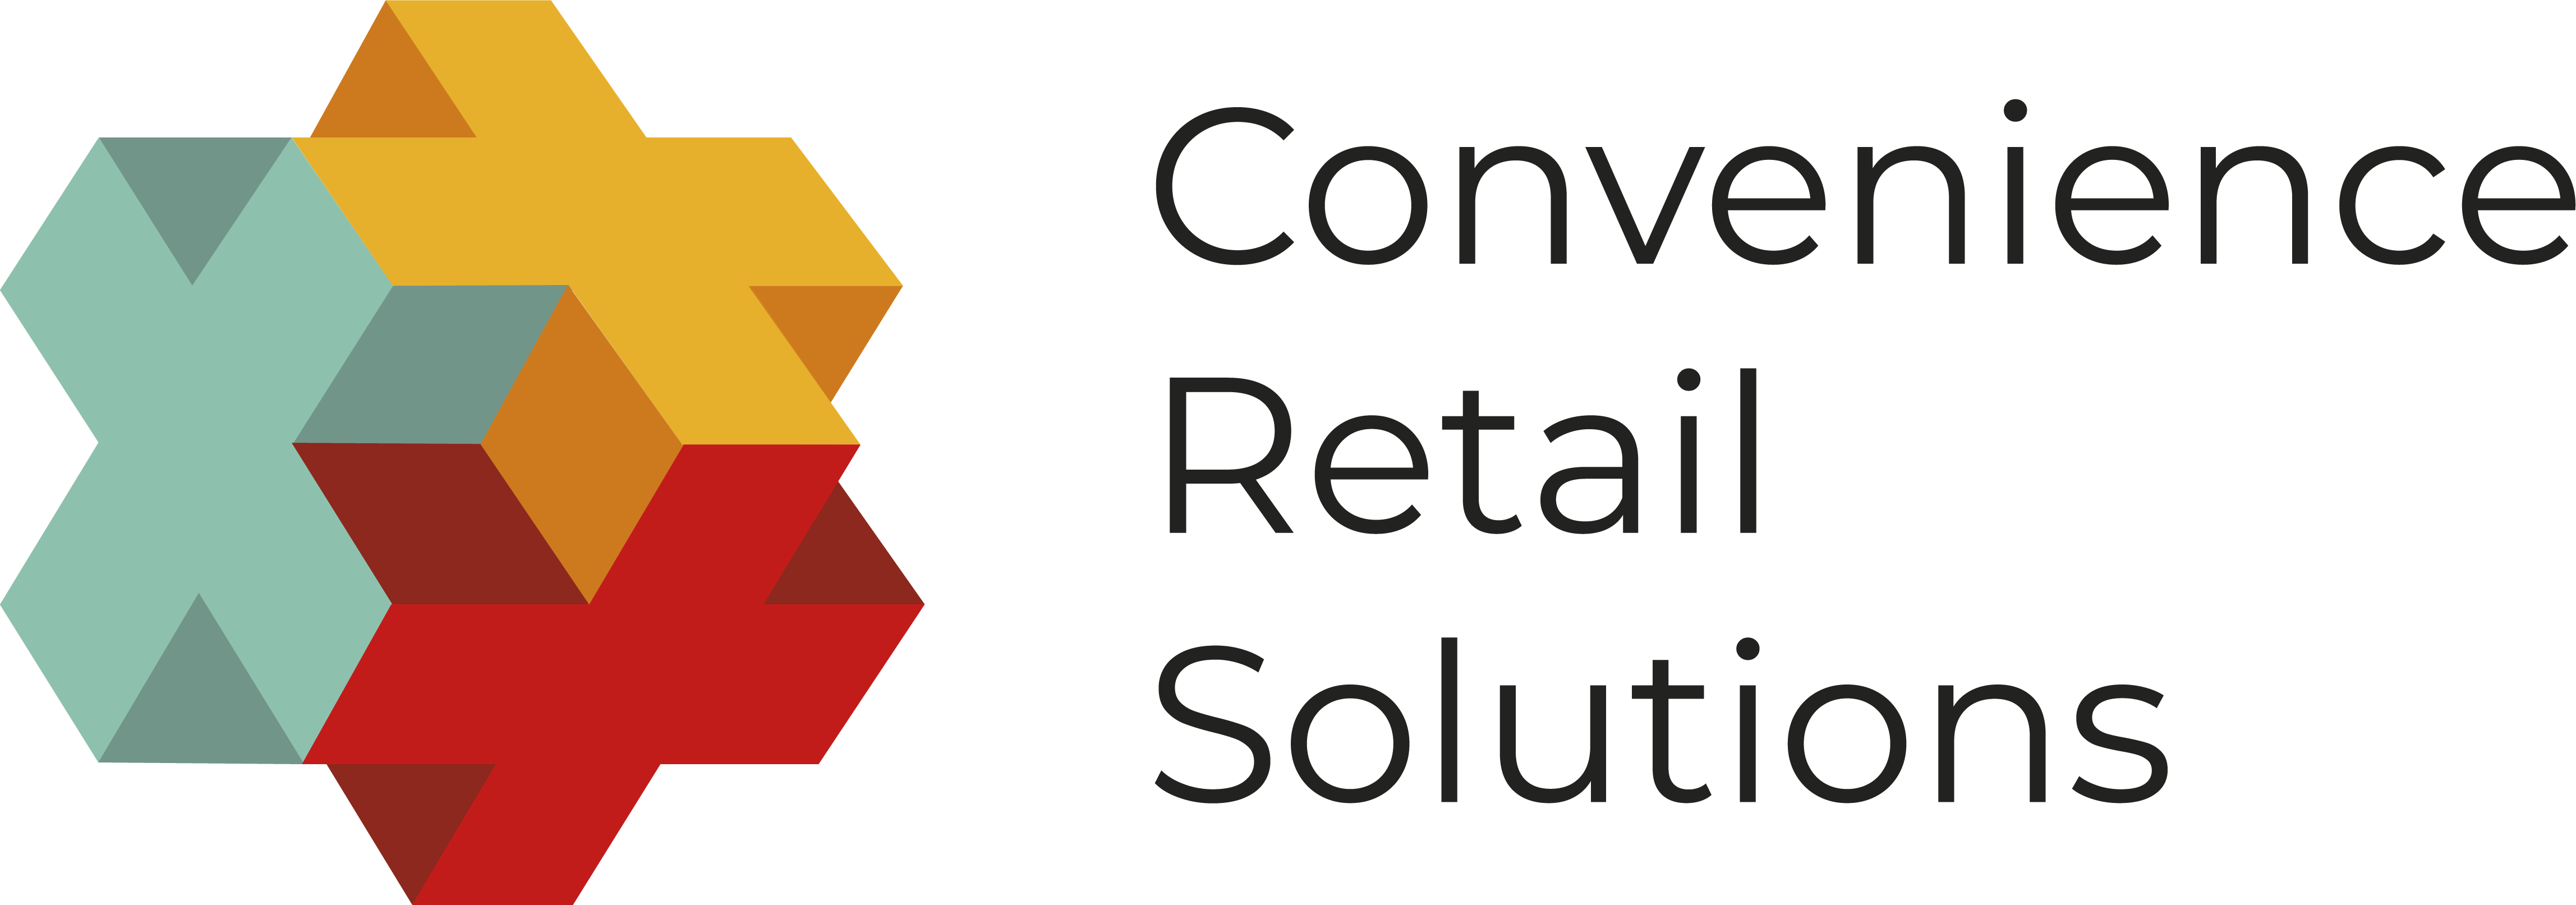 Convenience Retail Solutions